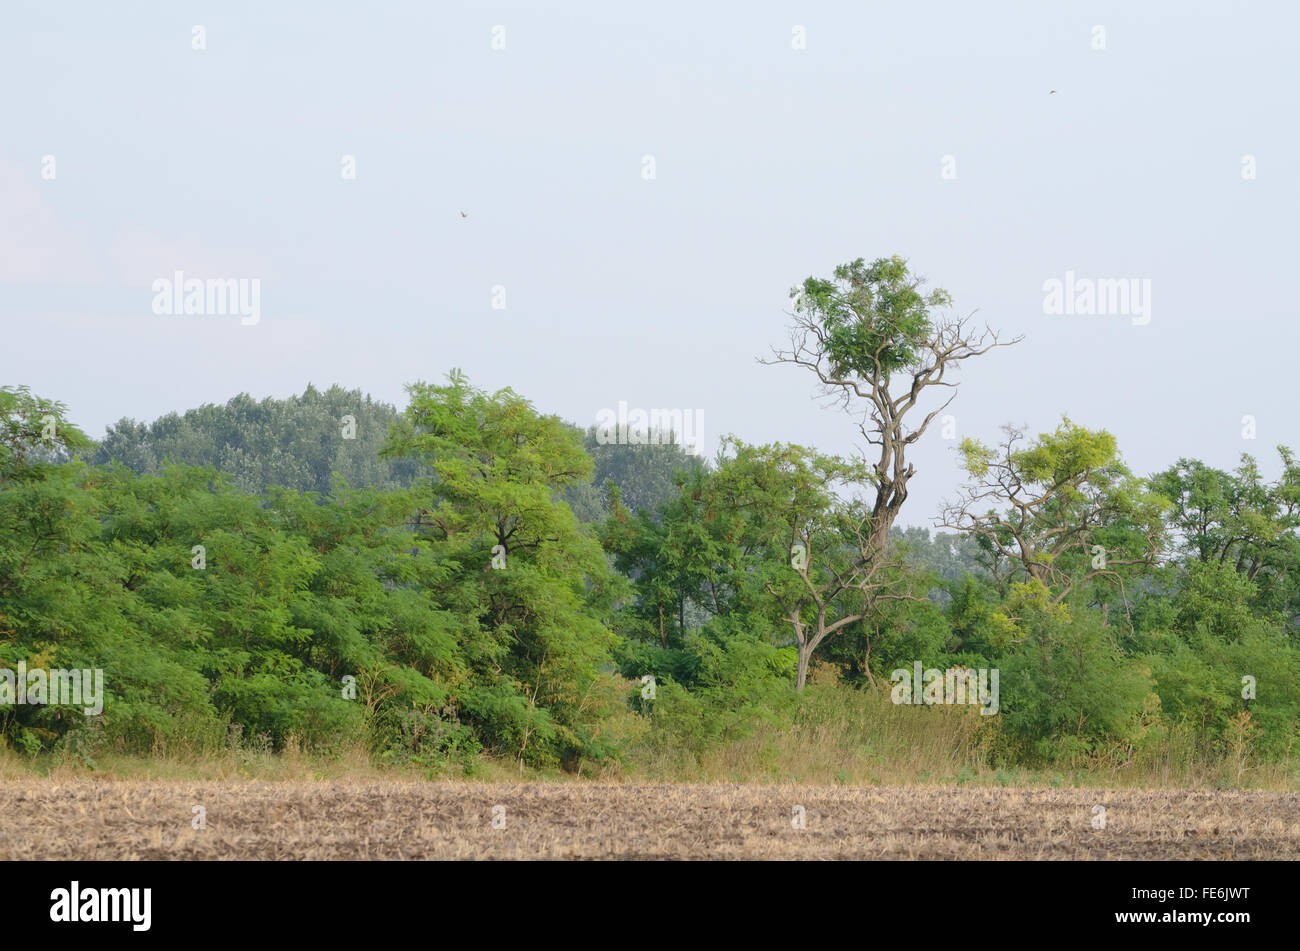 Tree Line next to Plow Land with Gnarled Acacia Stock Photo